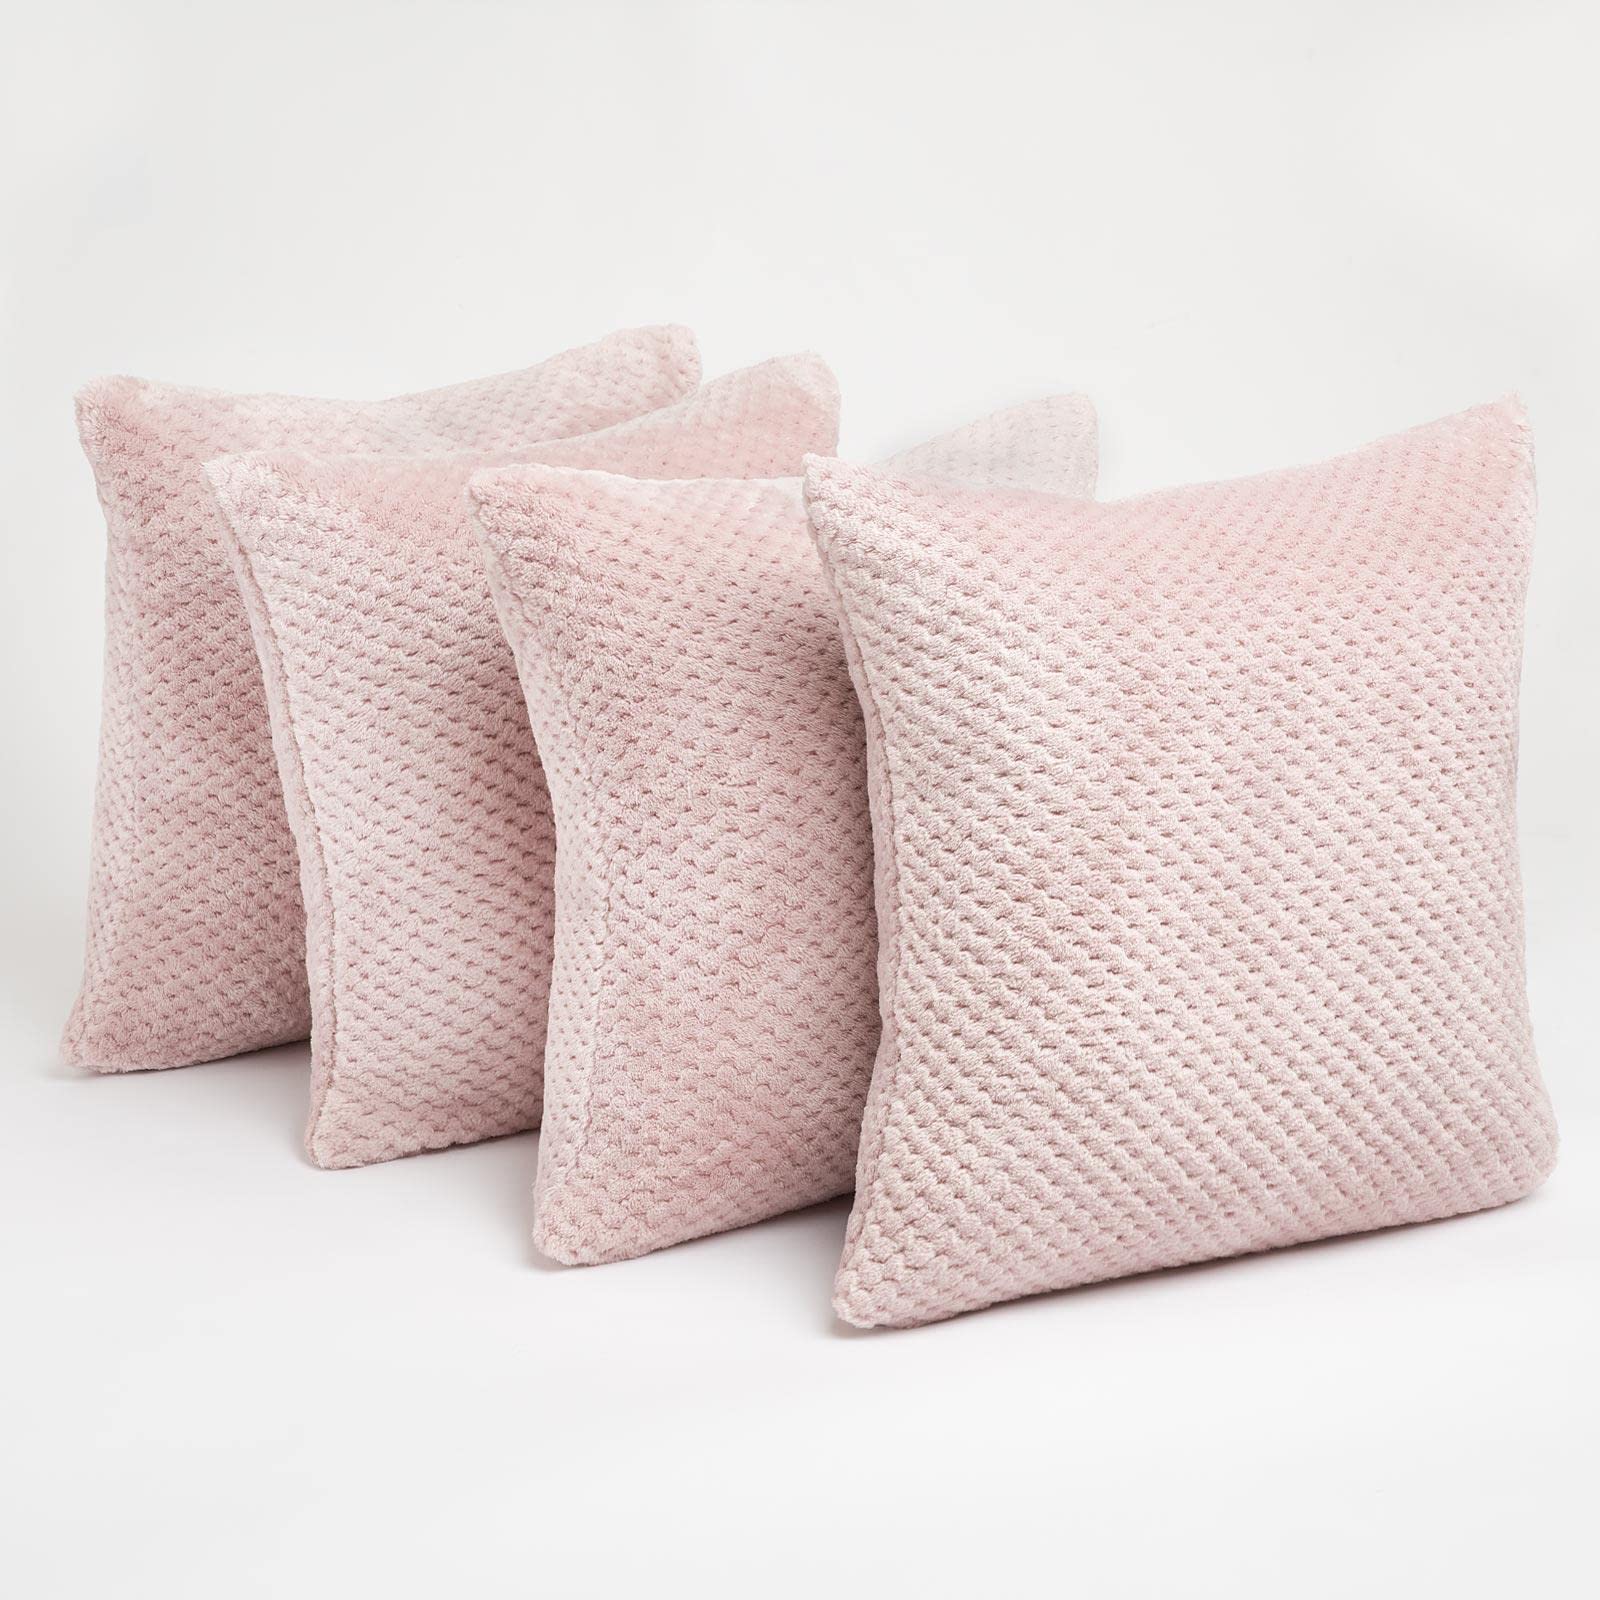 Brentfords Waffle Fleece Set of 4 x Cushion Covers 45 x 45 cm Plush Scatter Home Decor Pack, 18" x 18" - Blush Pink